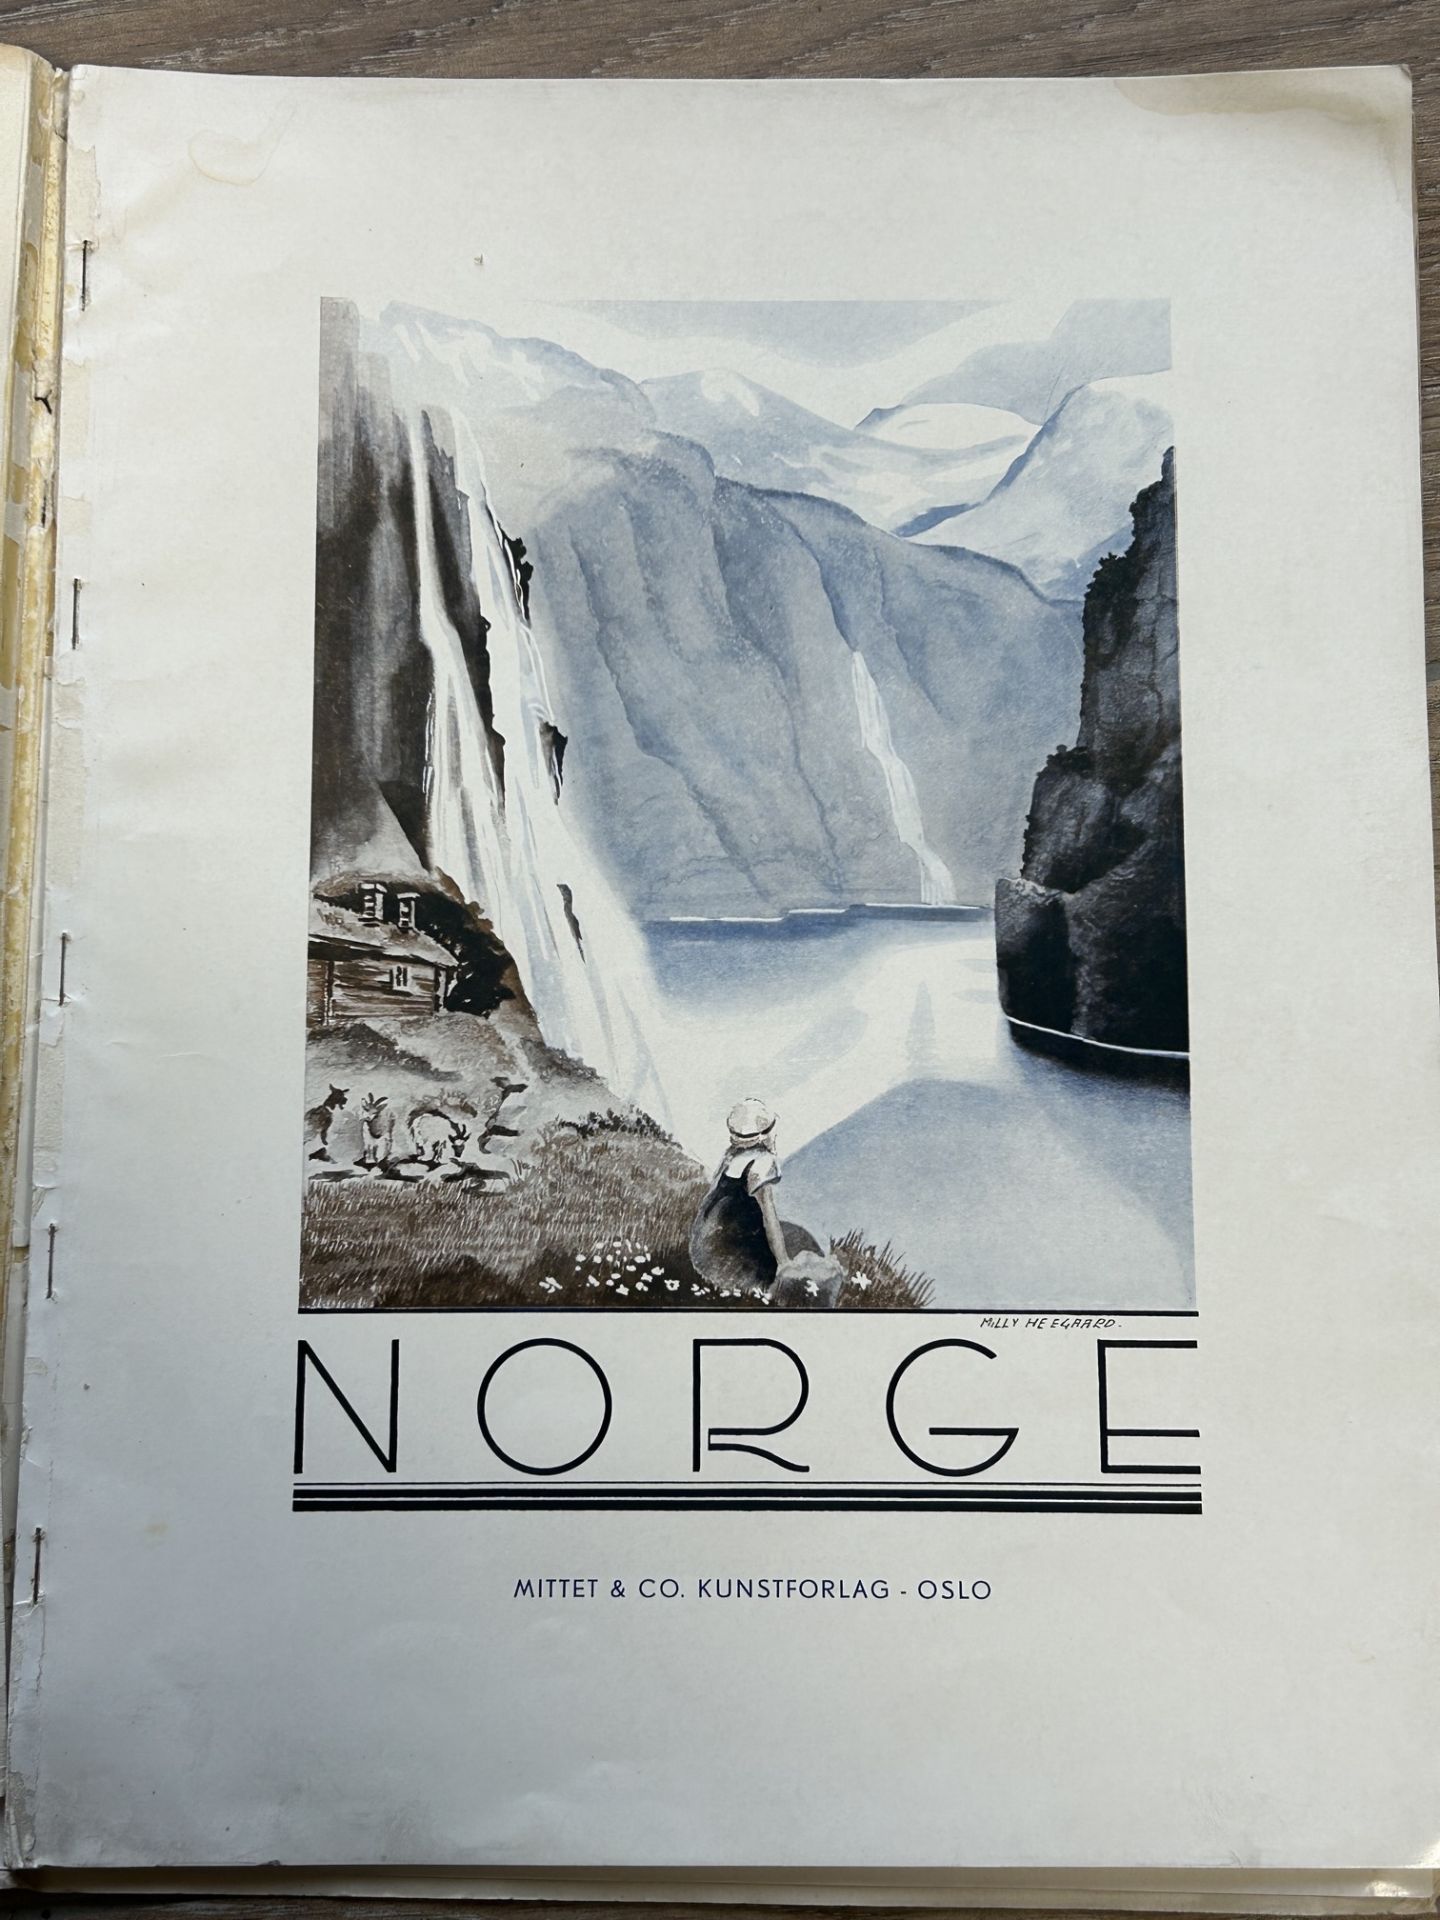 Livre Norge et diplome. Norge book and diploma. - Bild 3 aus 4